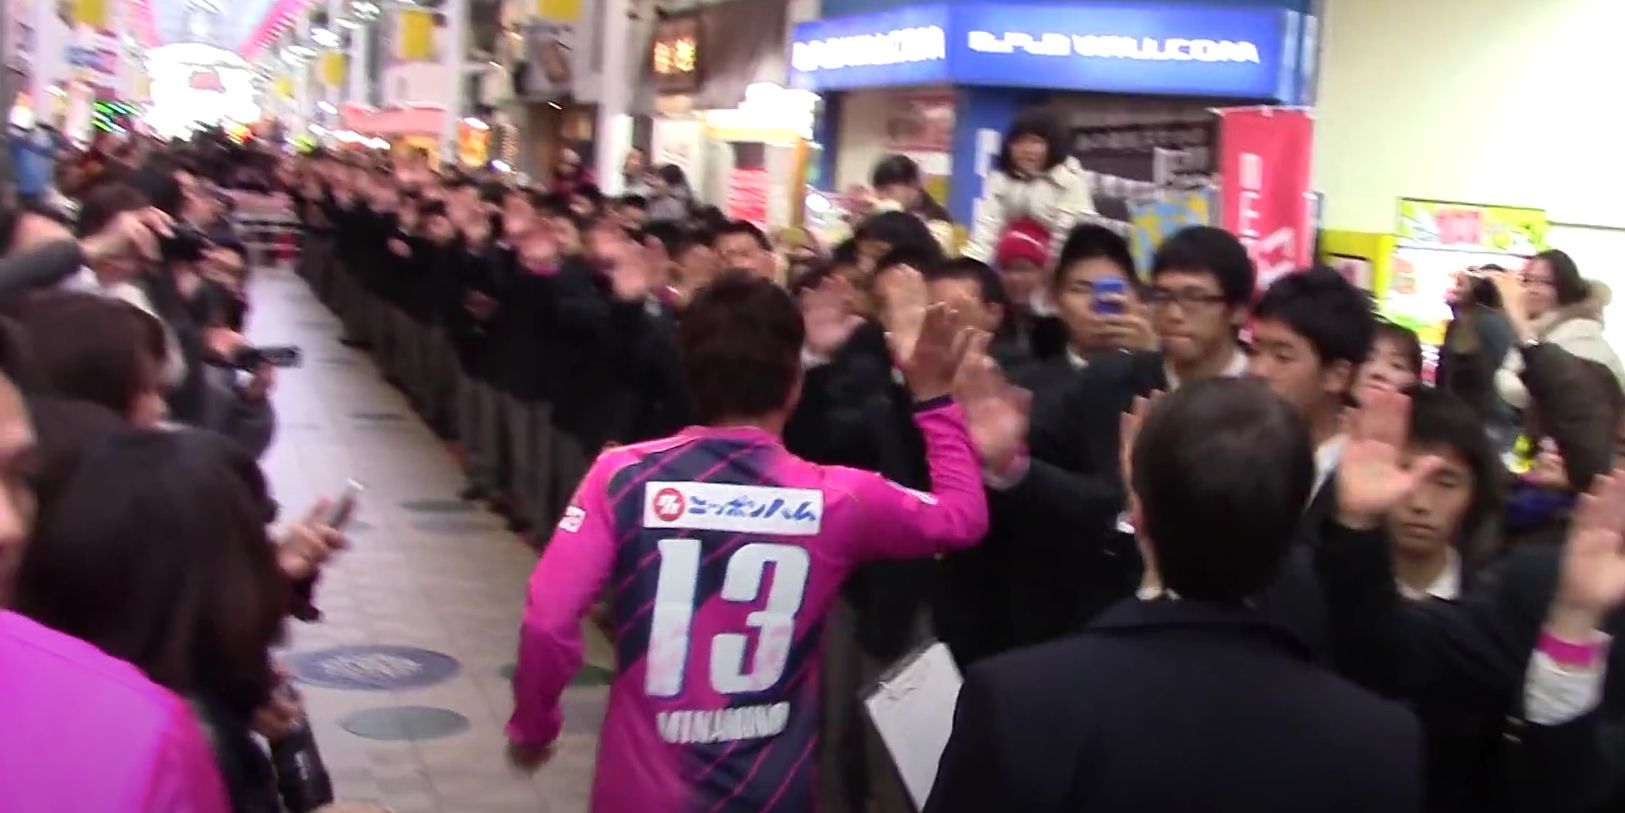 (Video) Watch as Takumi Minamino breaks the world record for most high-fives recorded in one minute